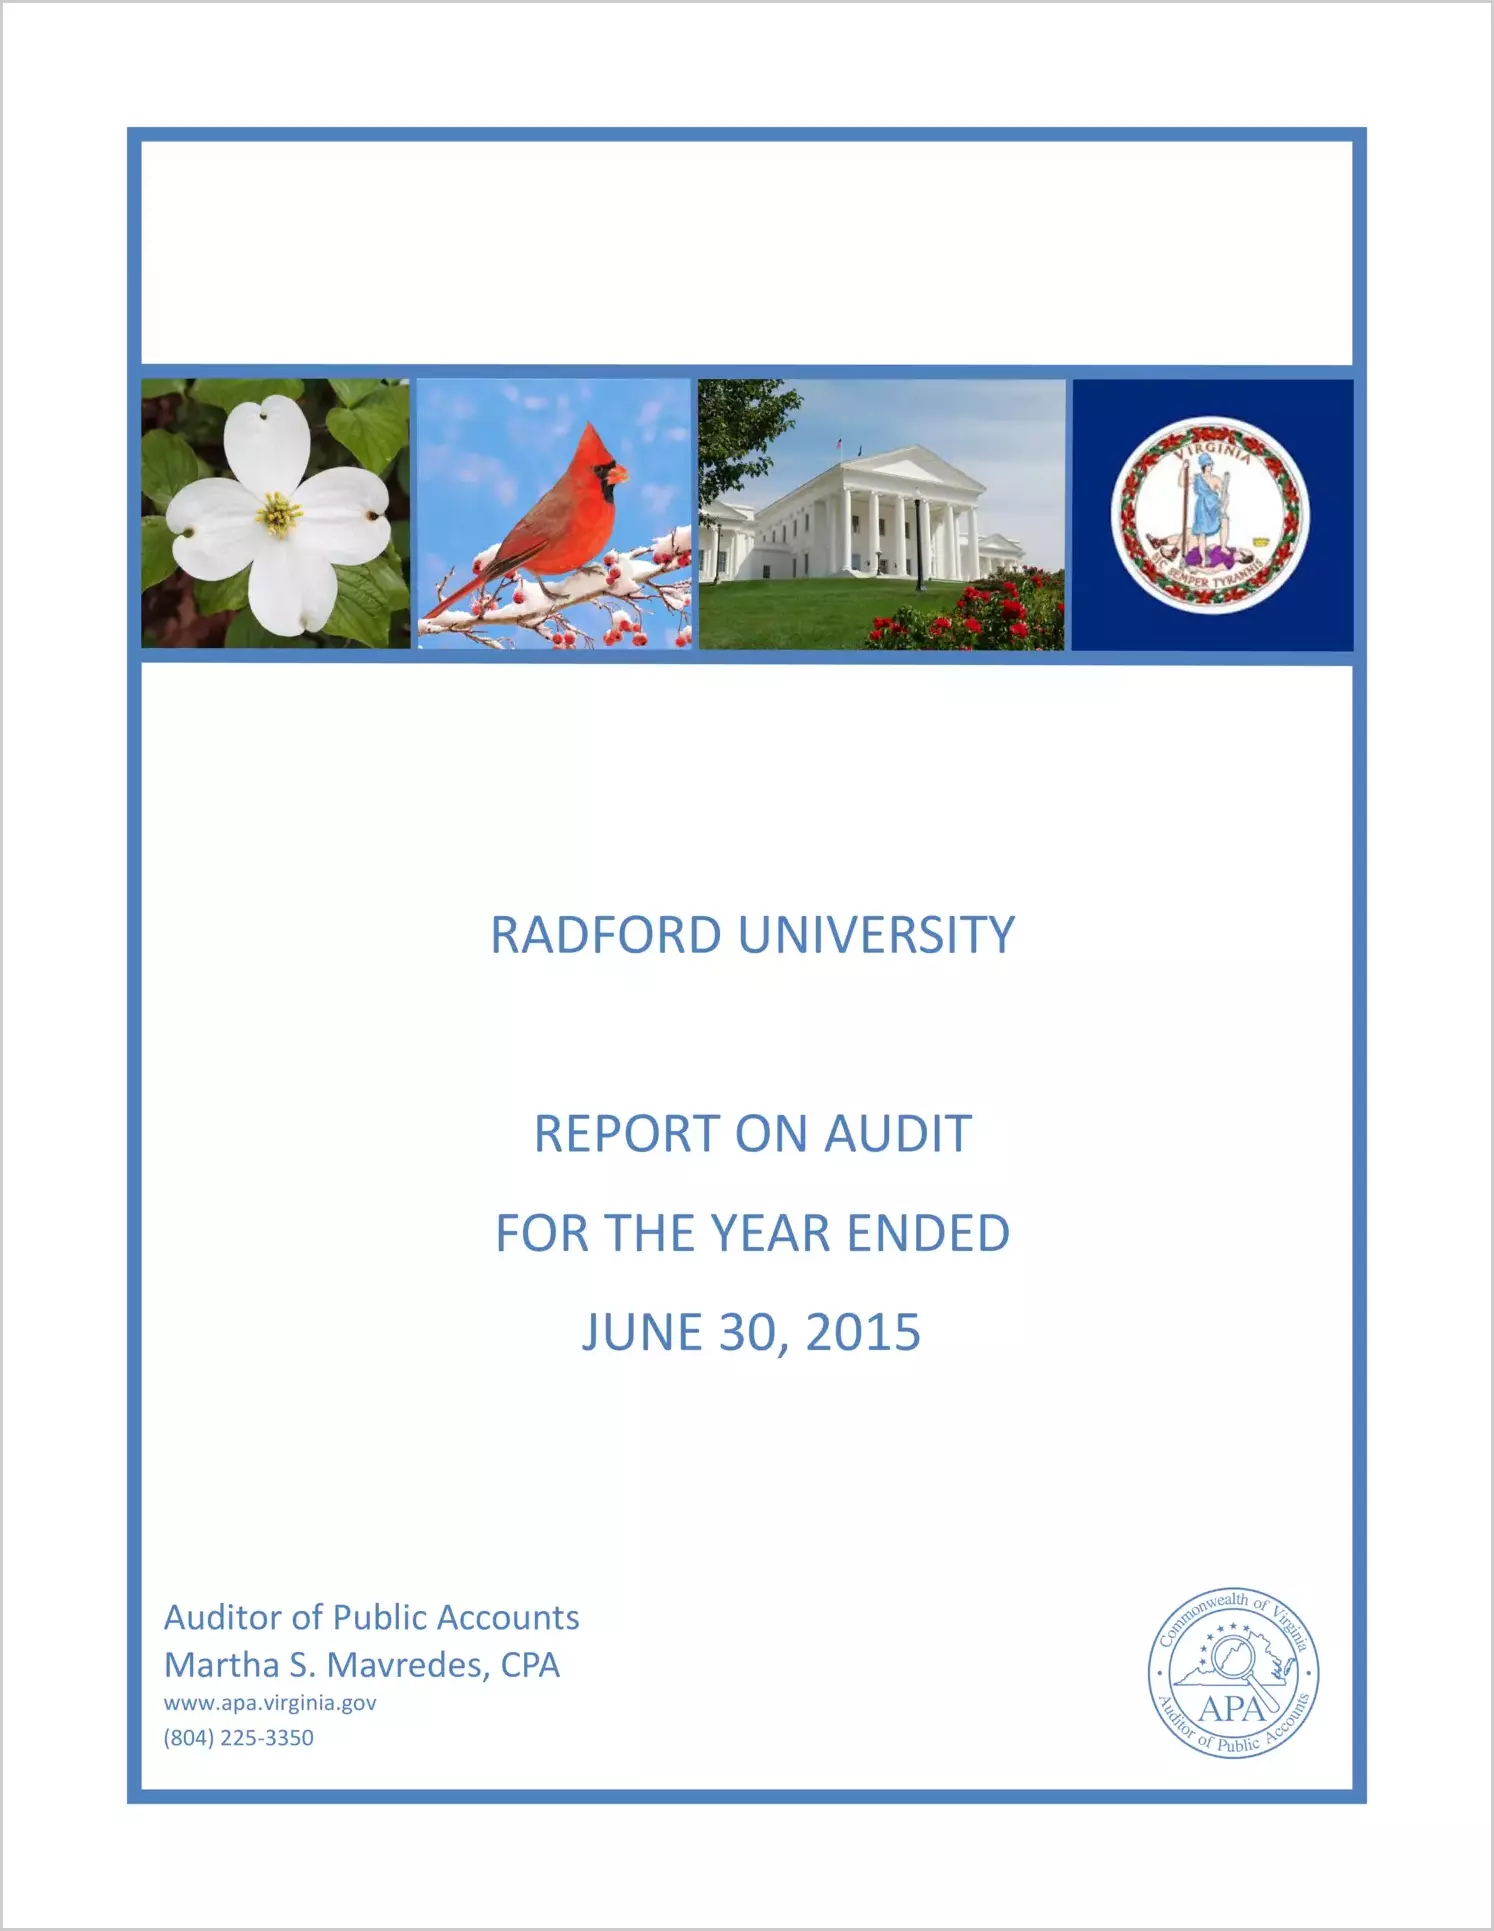 Radford University - report on audit for the year ended June 30, 2015